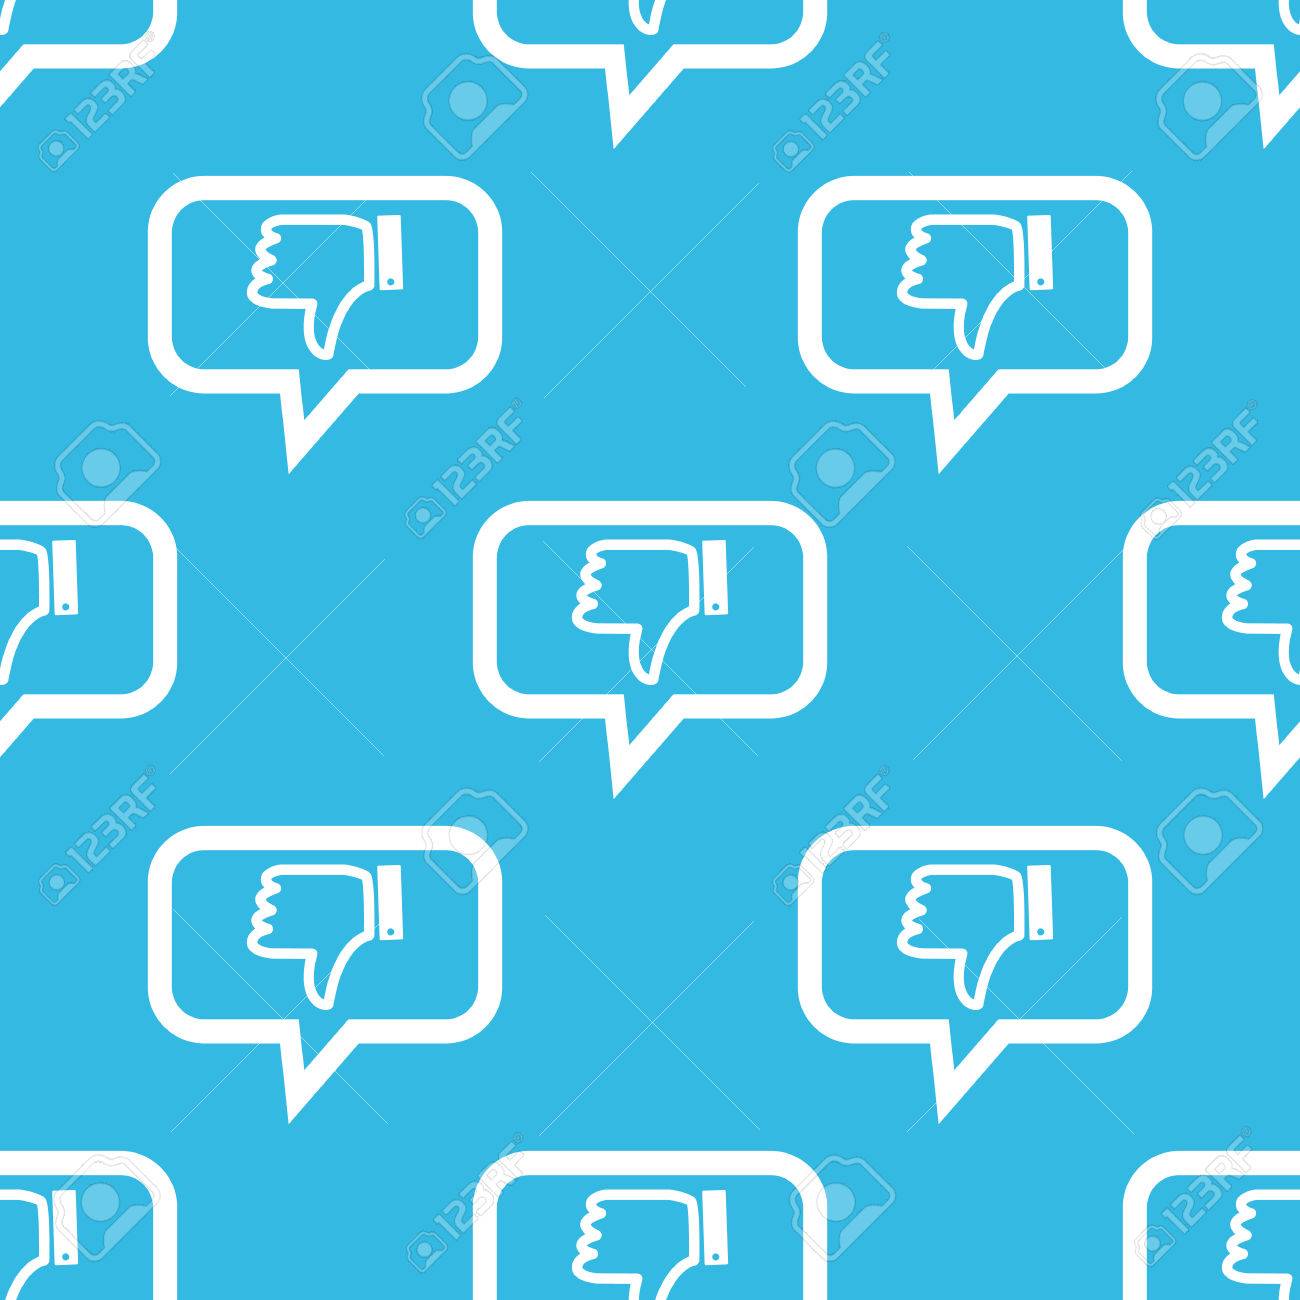 Image Of Dislike Symbol In Chat Bubble Repeated On Blue